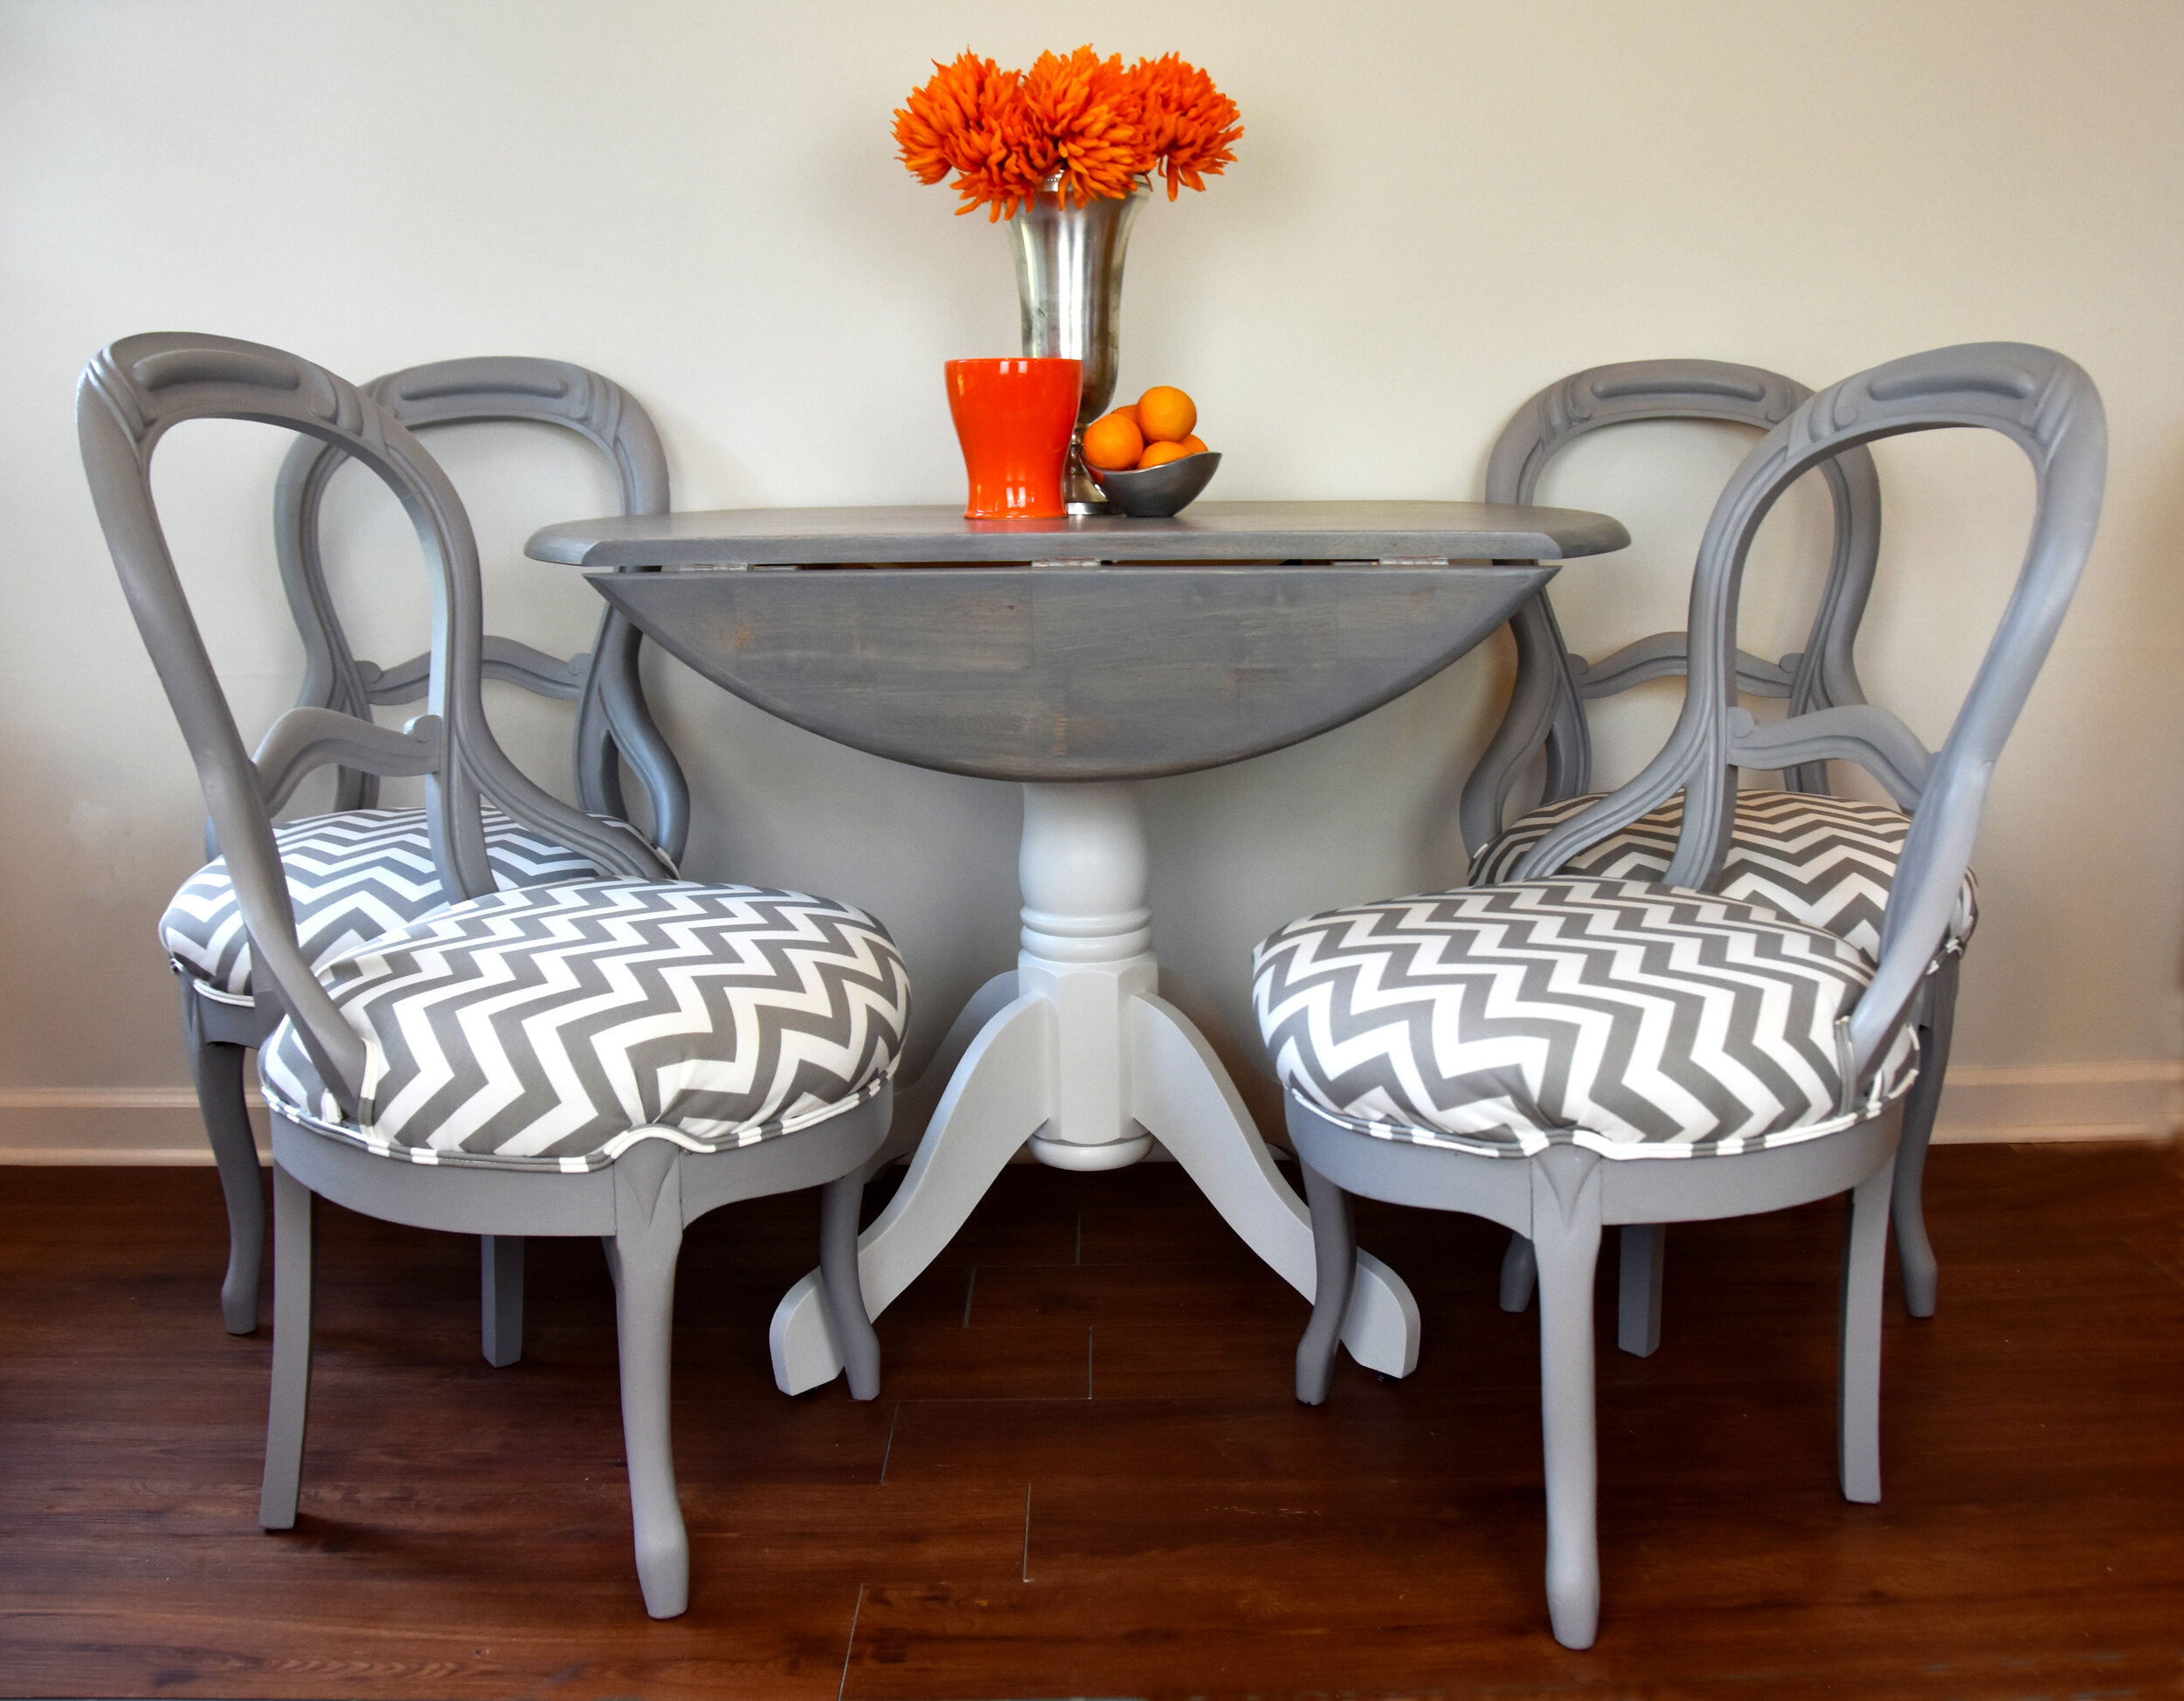 After staged table chairs.jpg